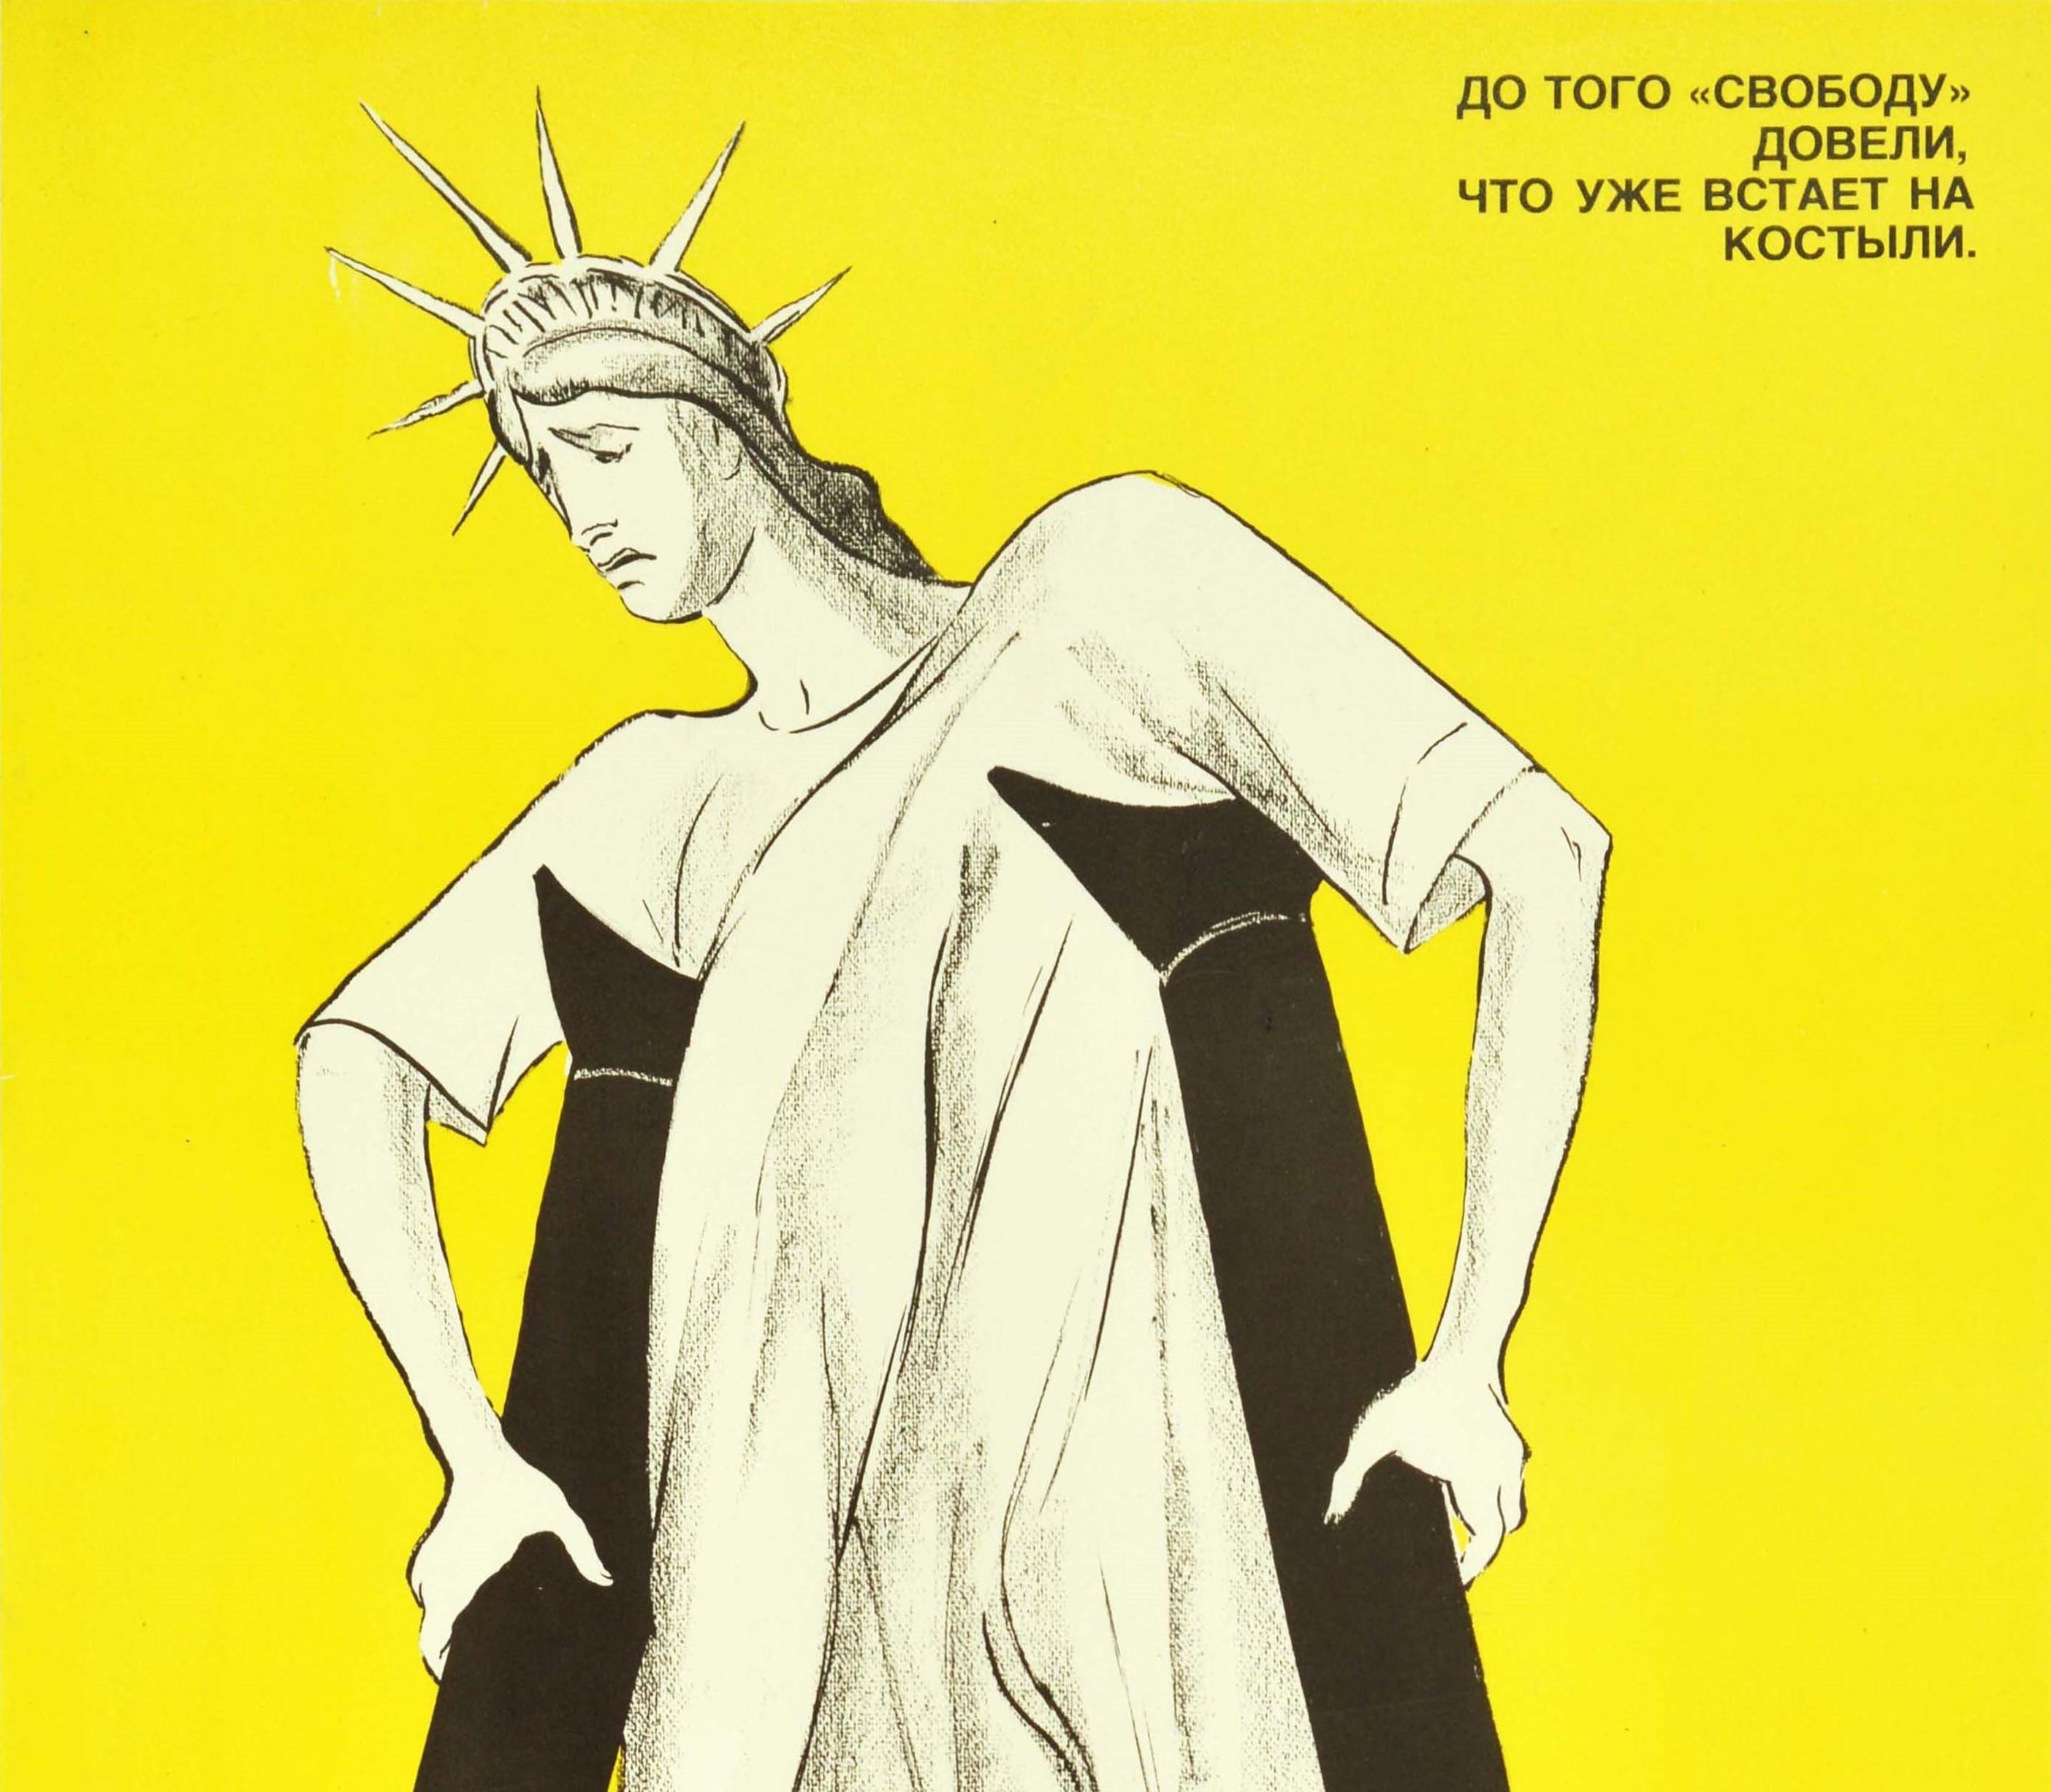 Original vintage Soviet propaganda poster depicting the Statue of Liberty in America with a sad face using black military missiles marked with dollar symbols at the bottom of the bombs as crutches on her plinth, against a bright yellow background